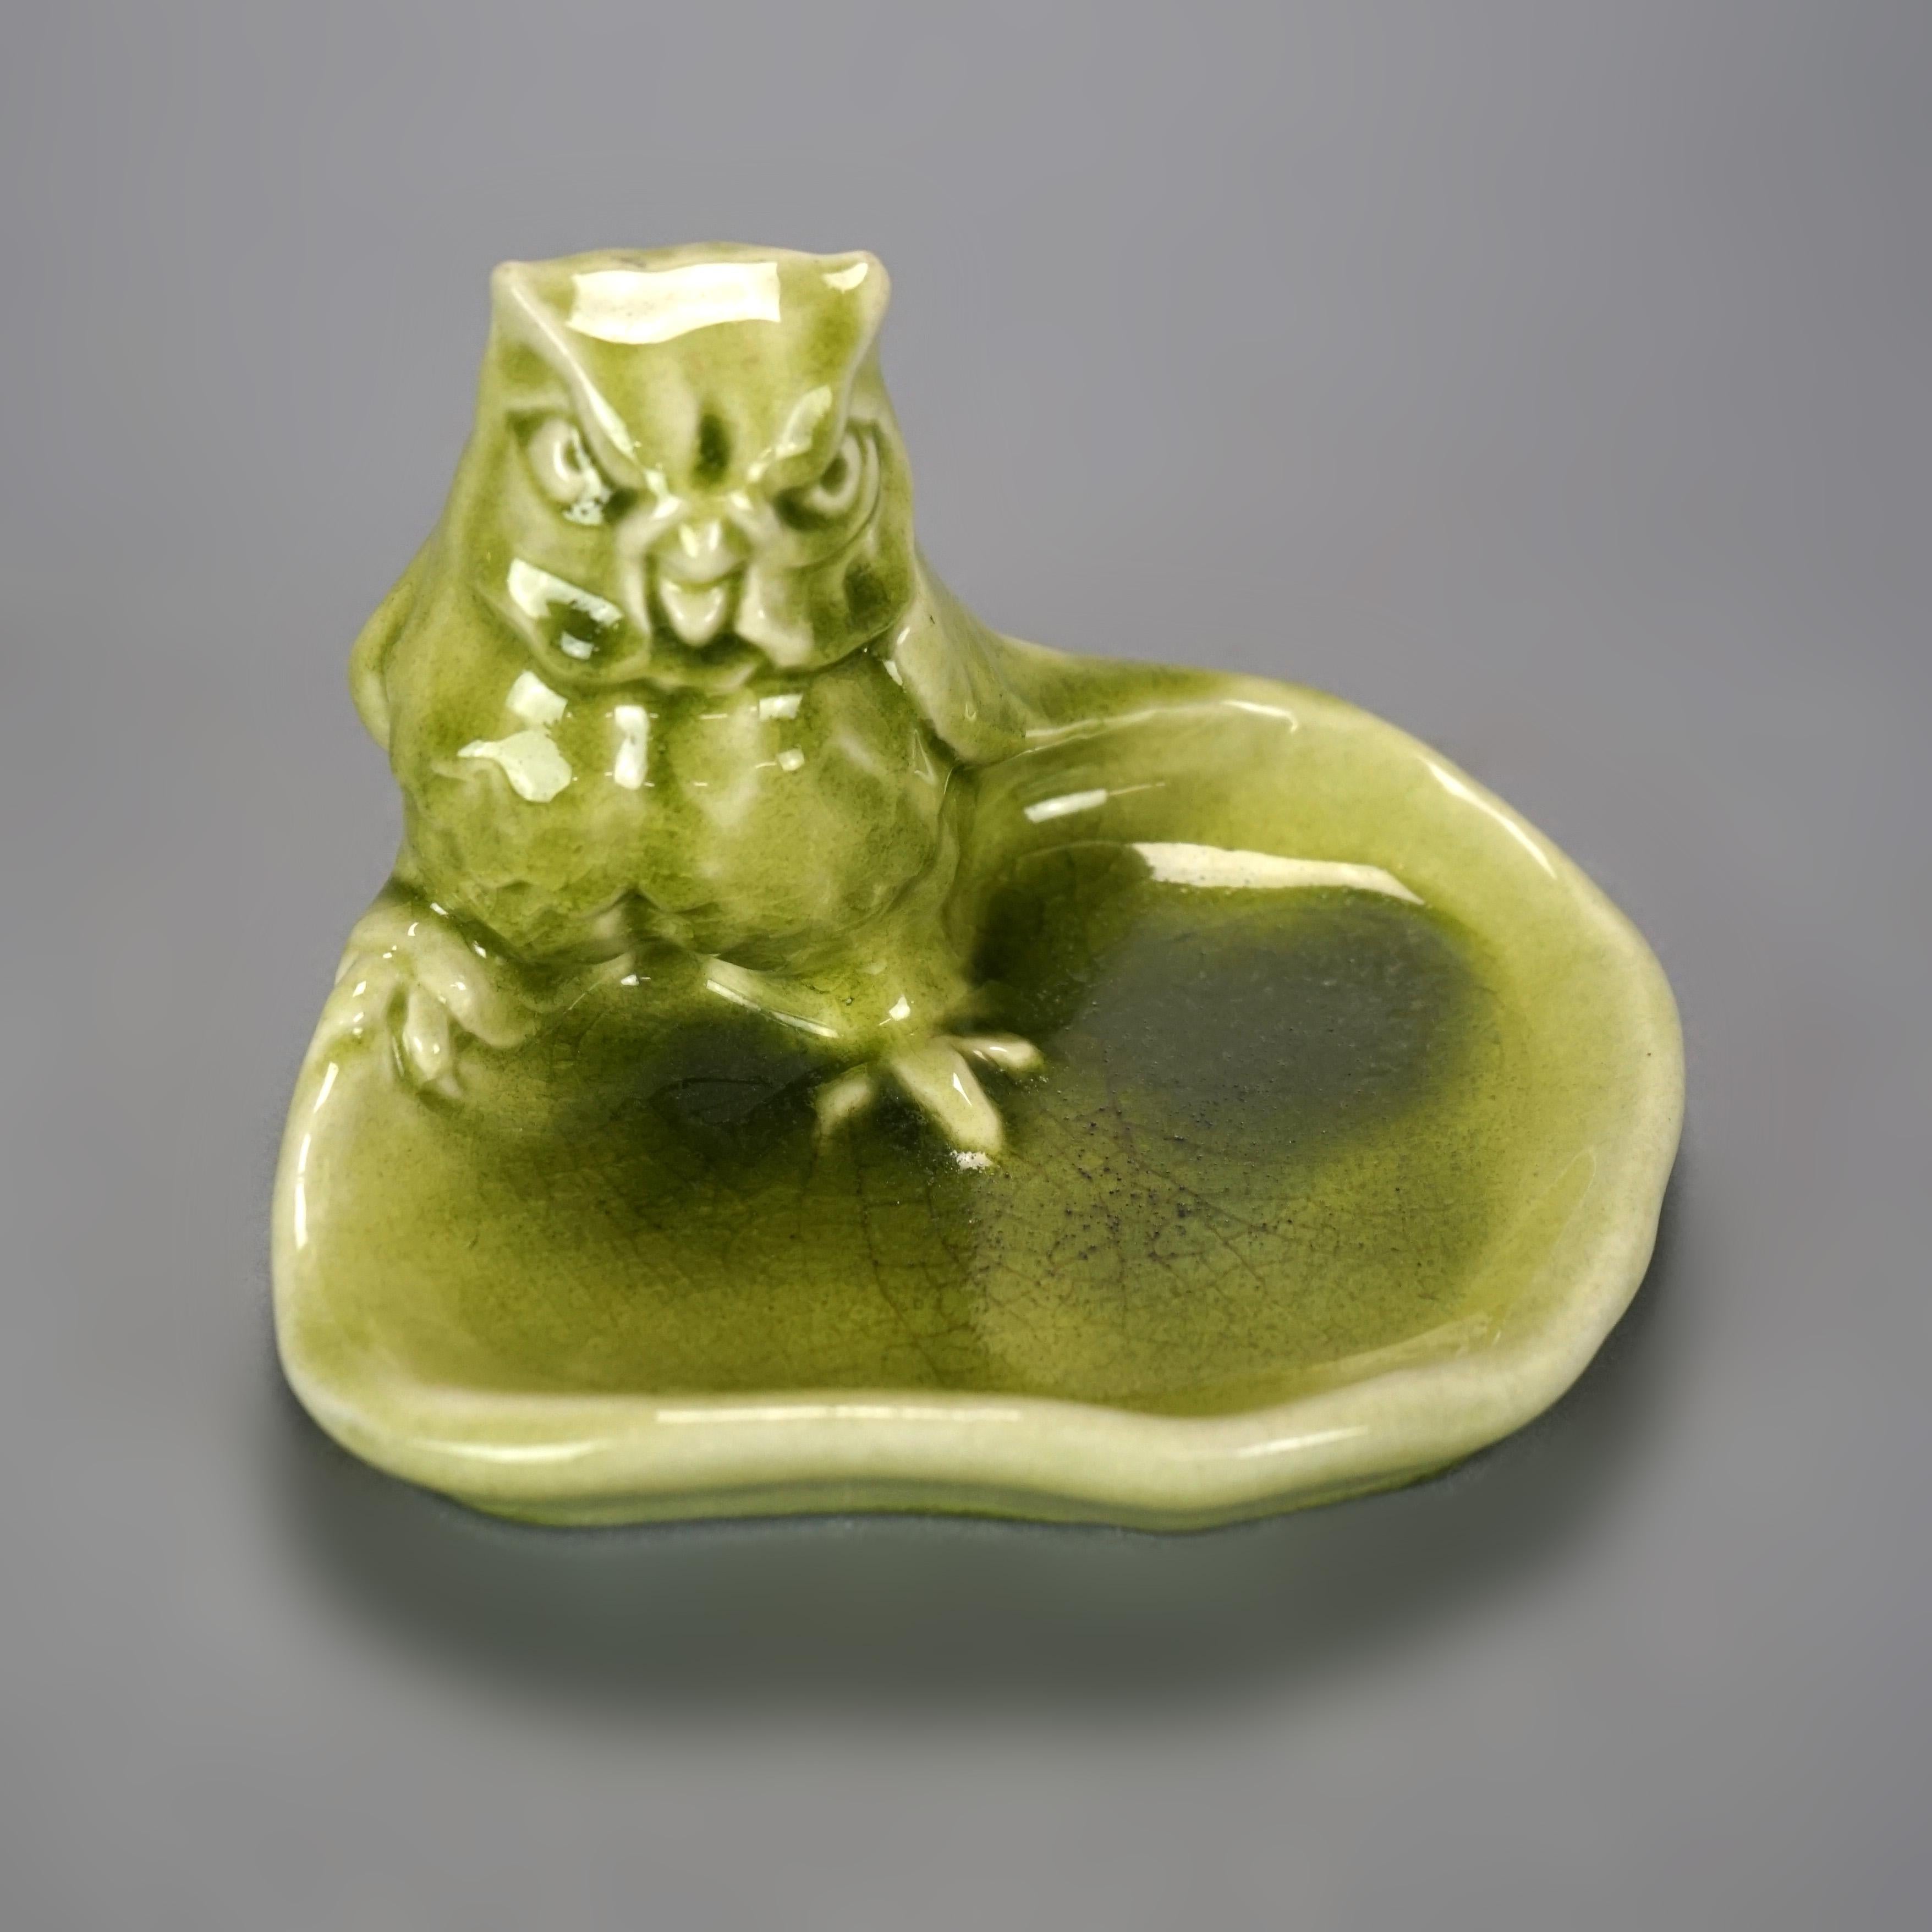 A figural dresser tray by Rookwood offers art pottery construction with owl and bowl, maker mark on base as photographed, dated 1948

Measures- 4.5''H x 6.5''W x 5.5''D.